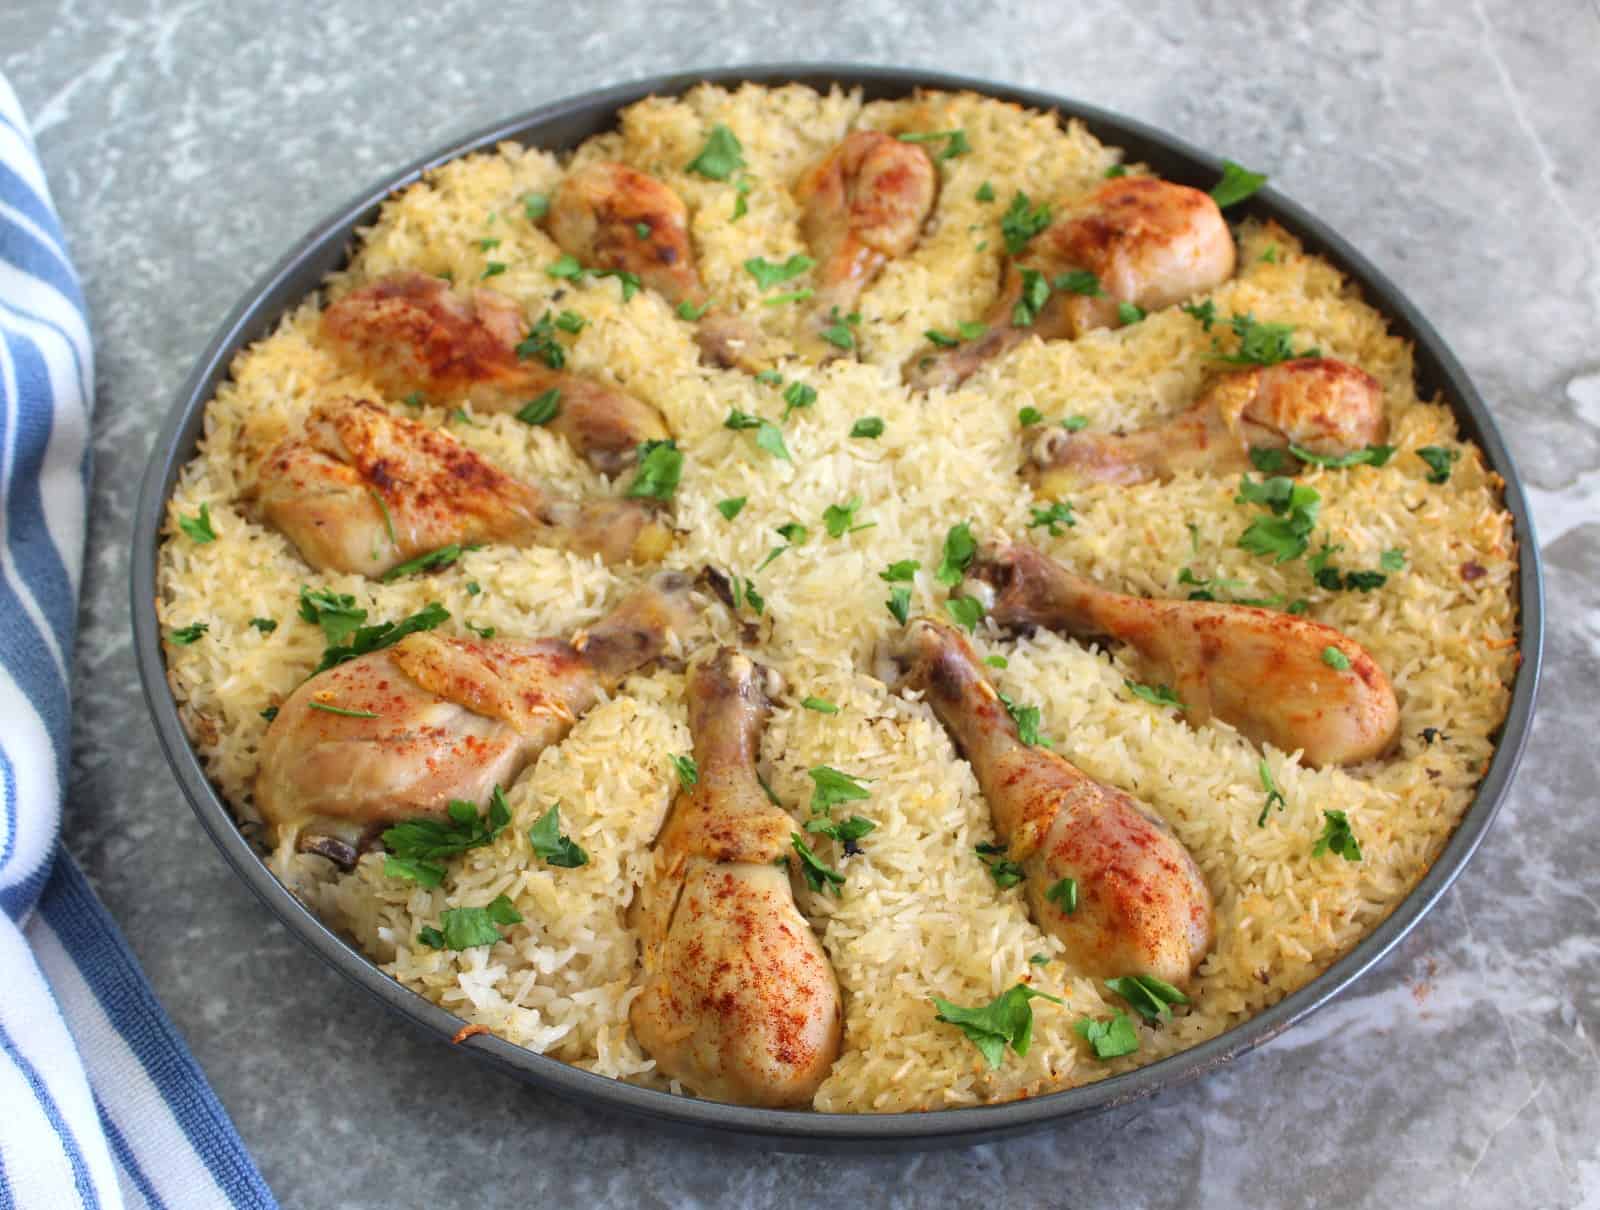 Round tray with a chicken & rice dish garnished with chopped parsley. Chicken drumsticks are also laid out in a circular shape.